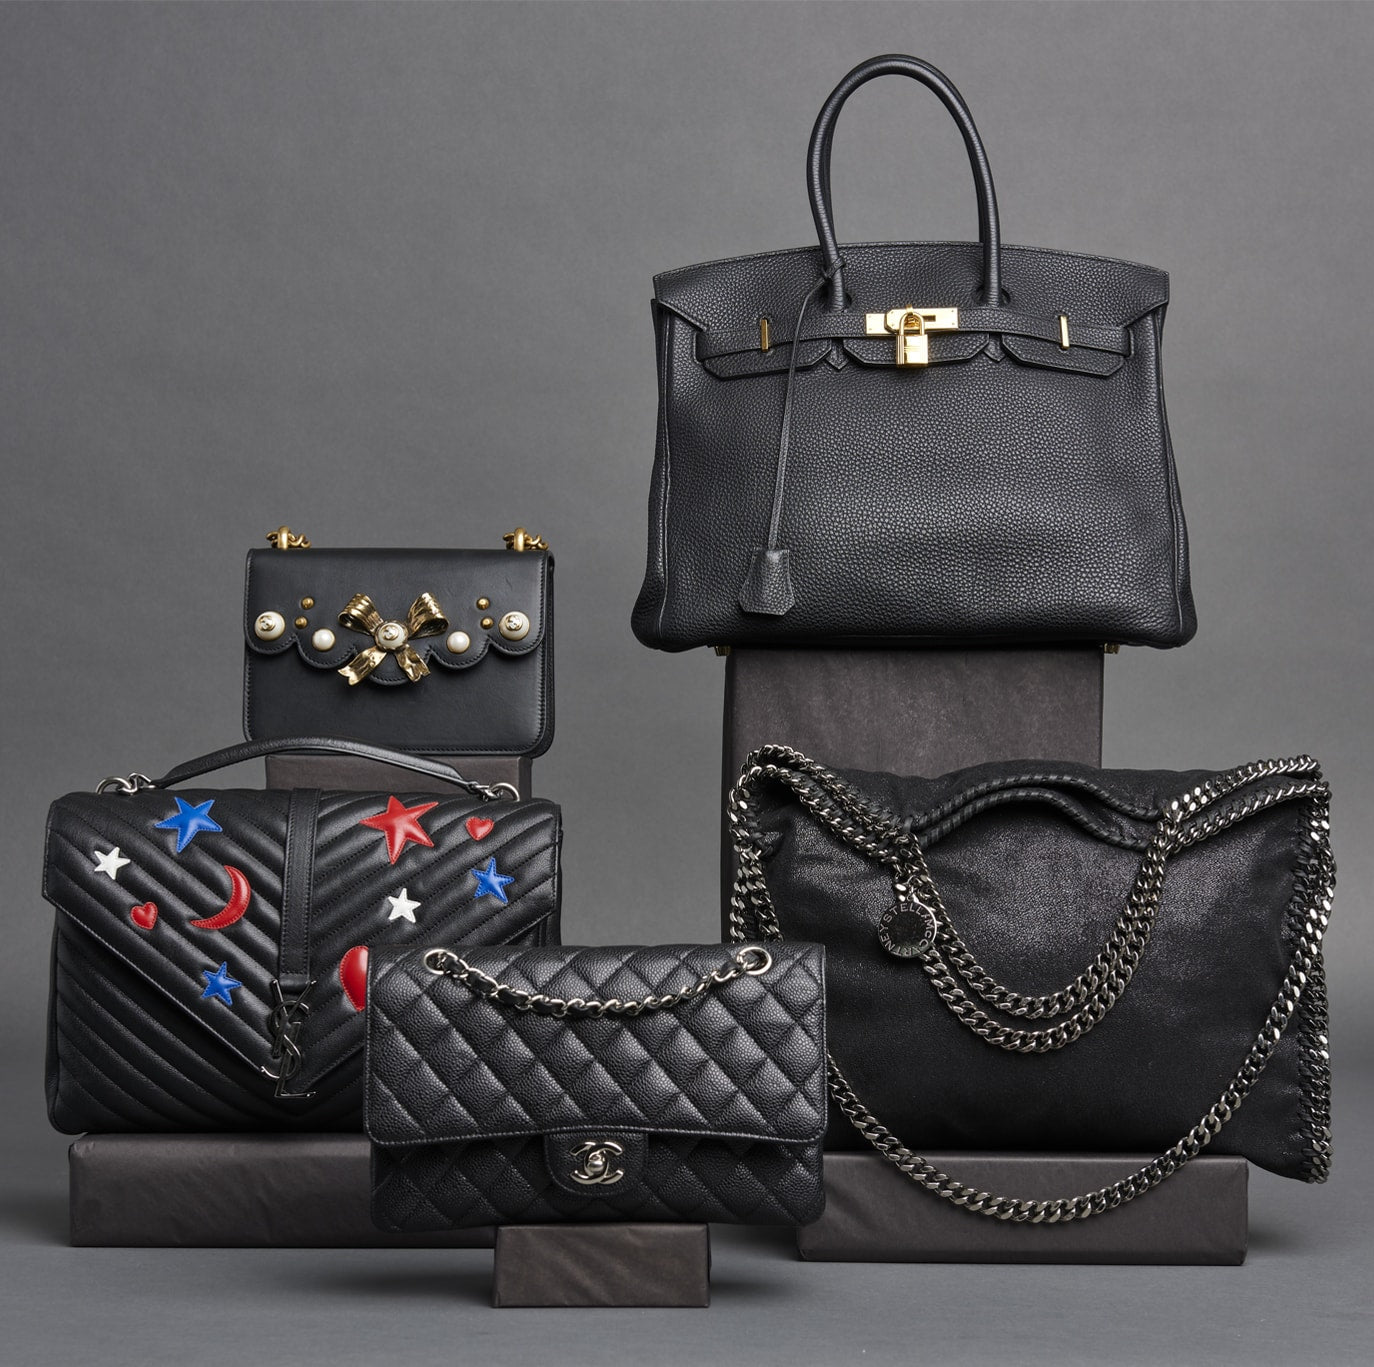 Sell Used Designer Bags | Paul Smith